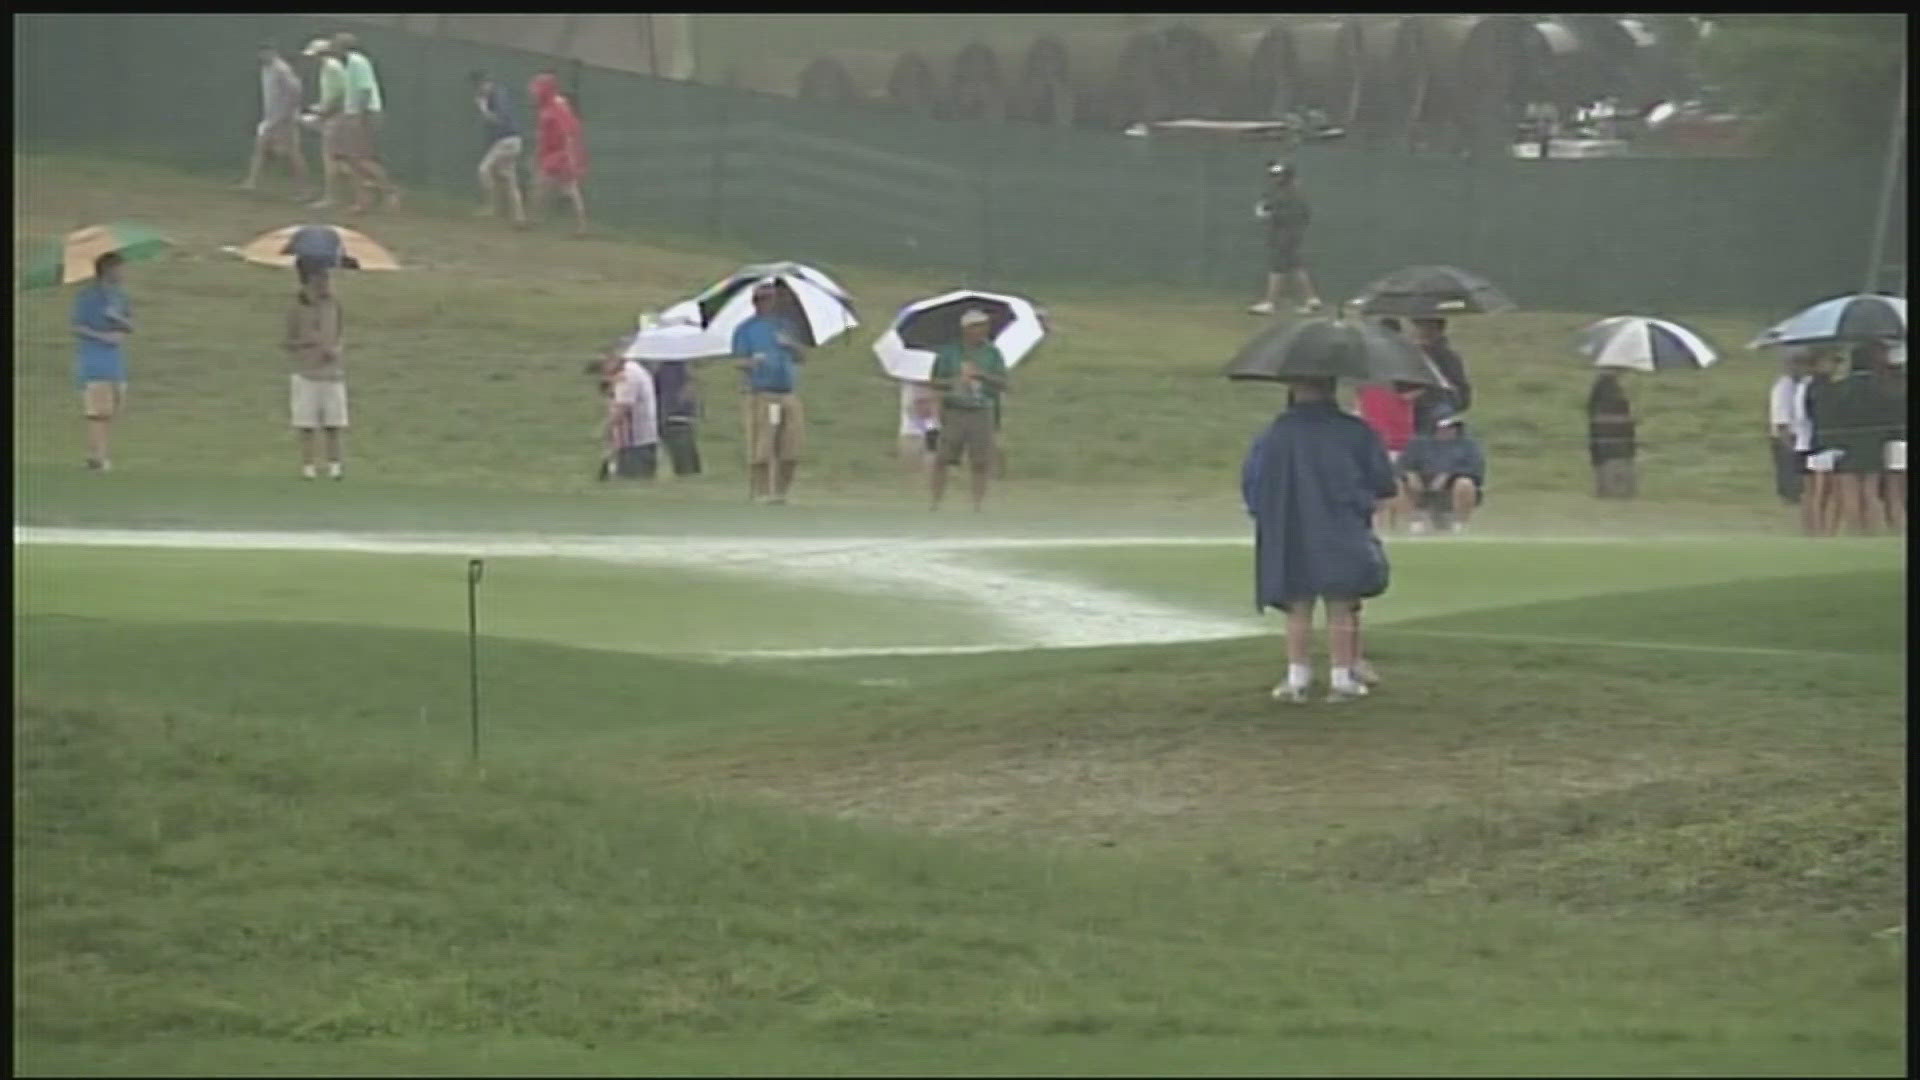 As Valhalla Golf Club is preparing for the PGA Championship in Louisville, officials are keeping an eye on flood potentials during the tournament.